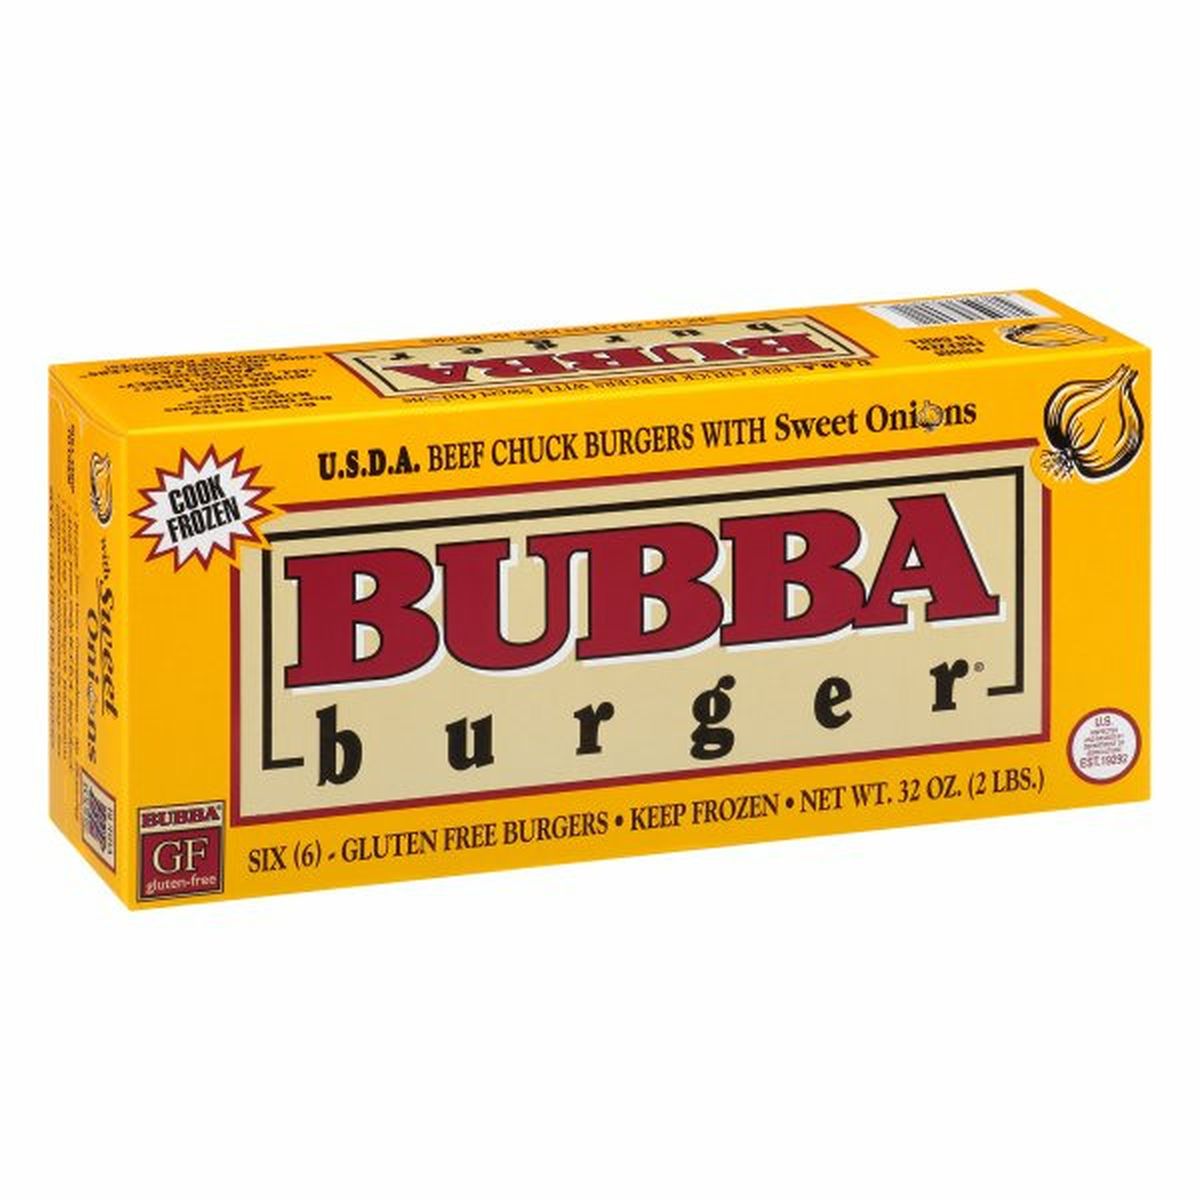 Calories in Bubba Burger Burgers, Beef Chuck with Sweet Onions